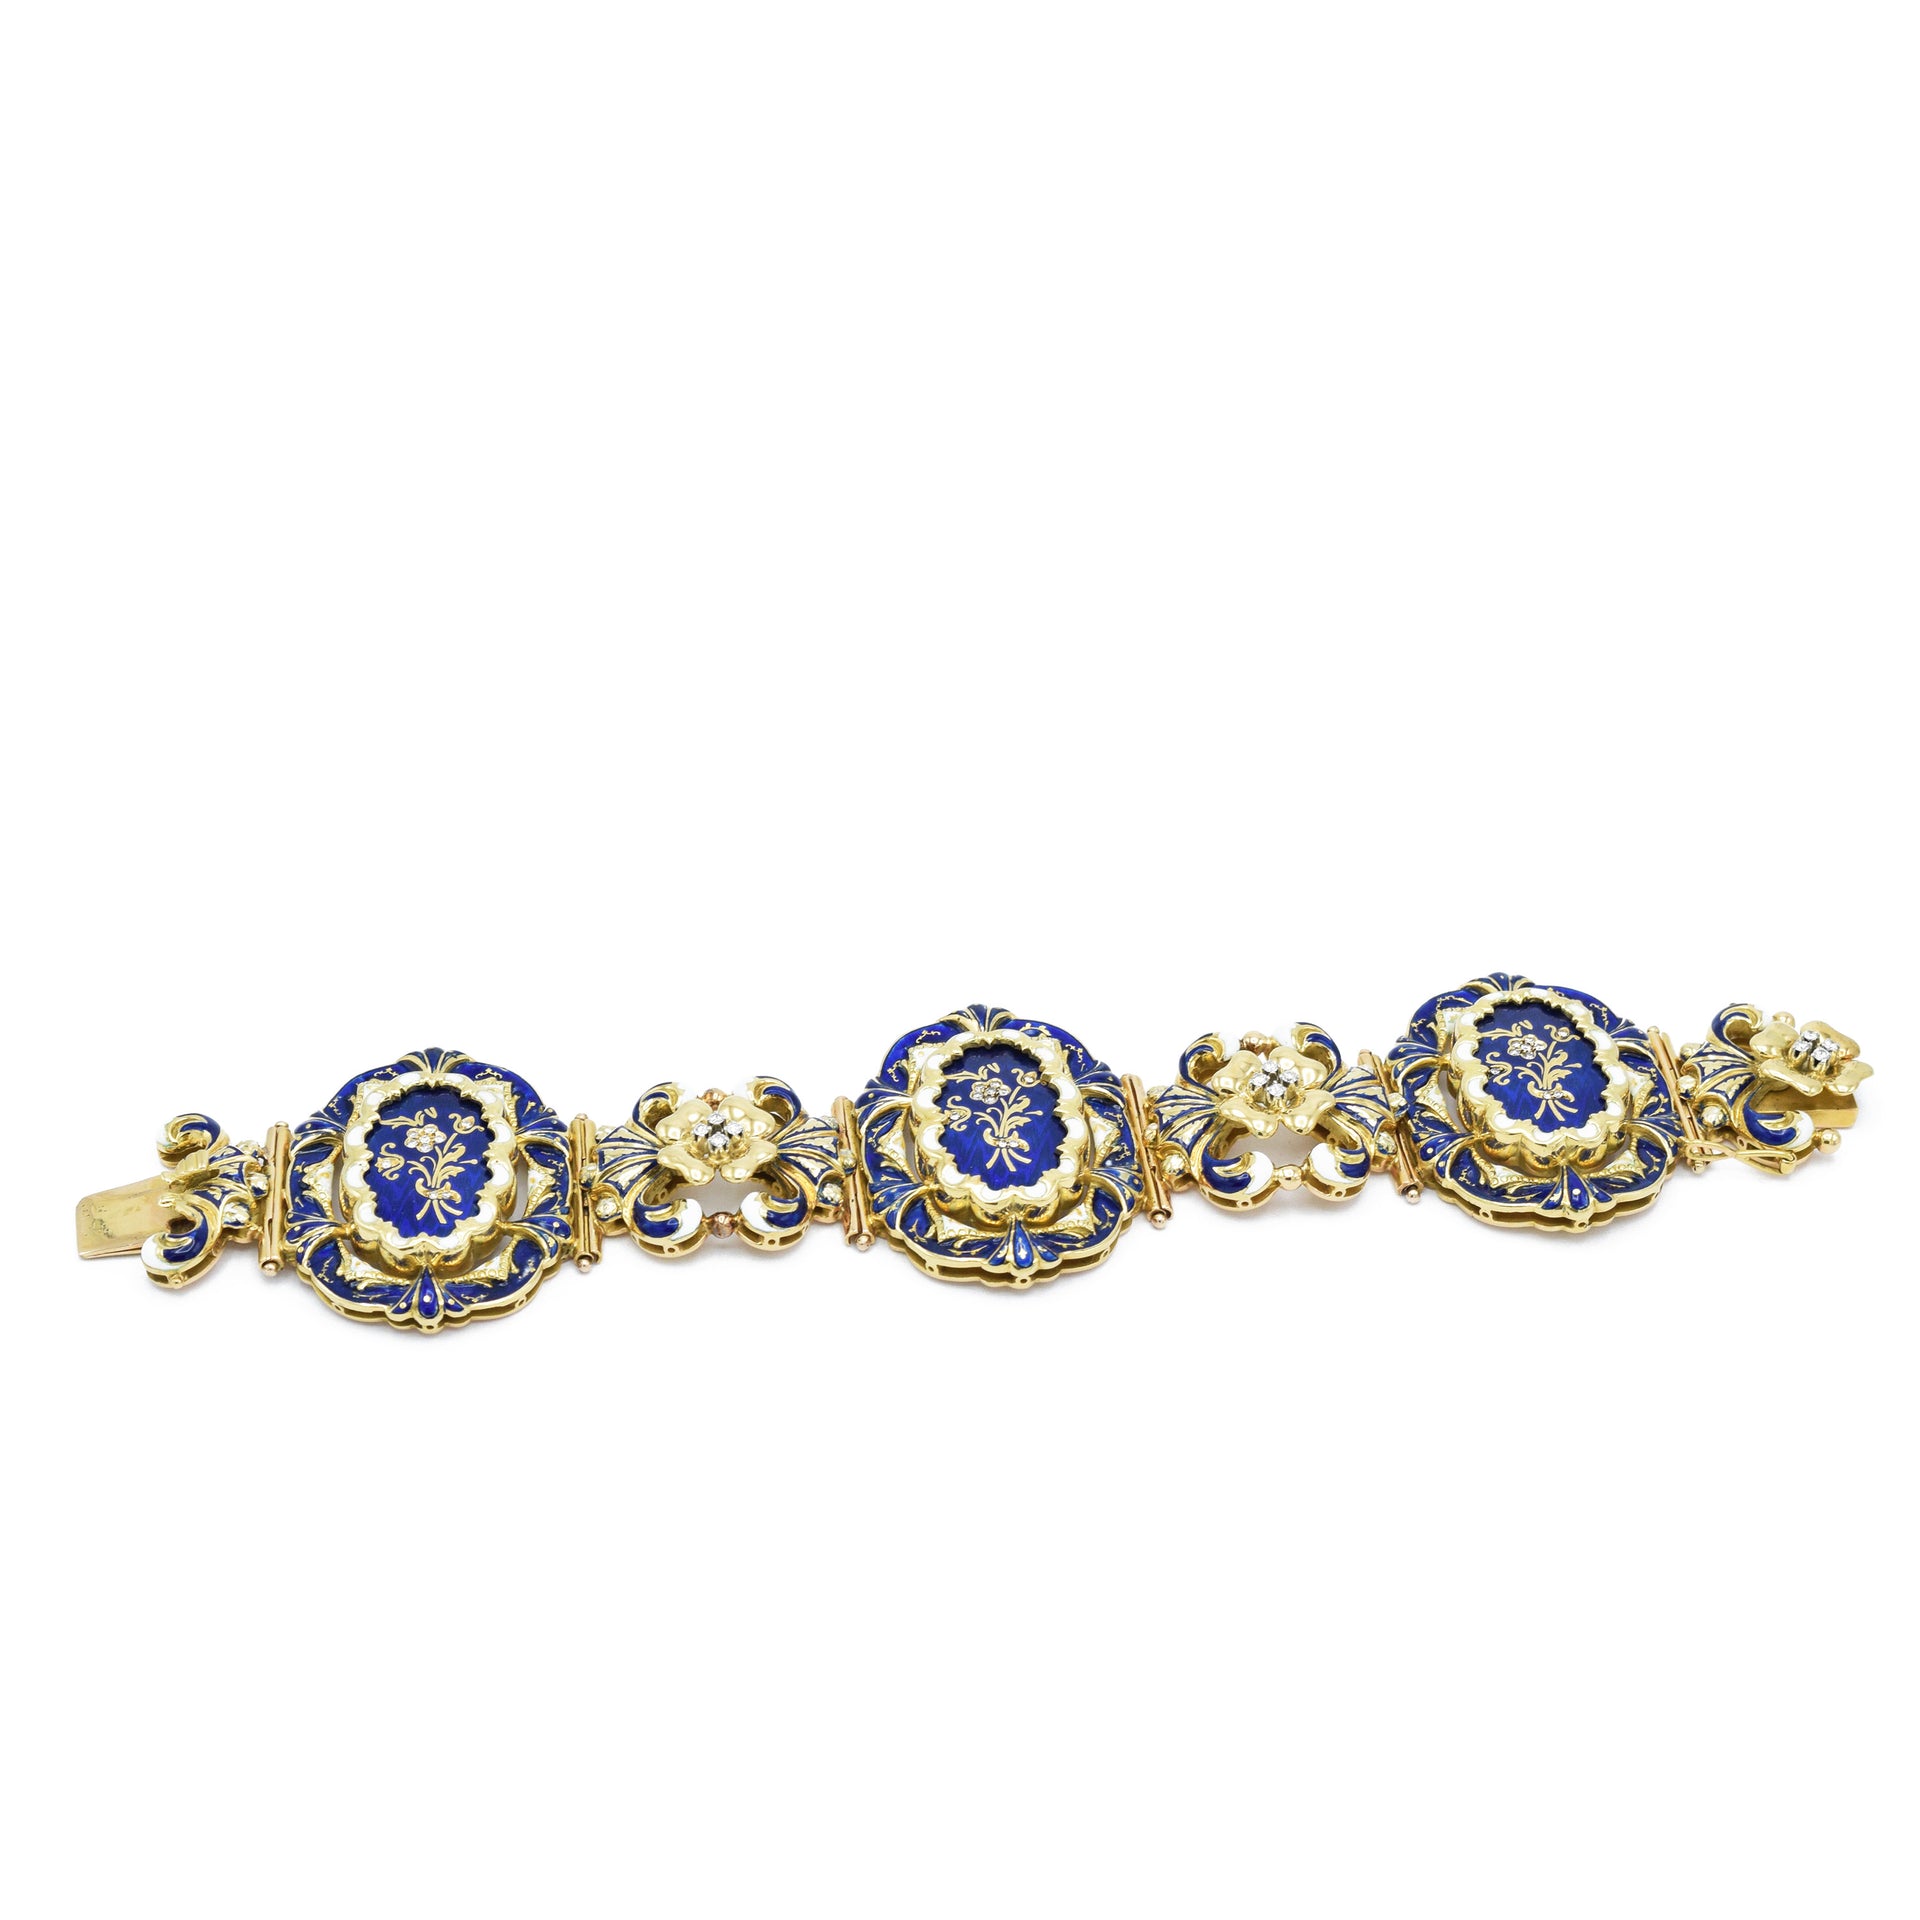 Victorian Yellow Gold and Enamel Bracelet with Diamonds